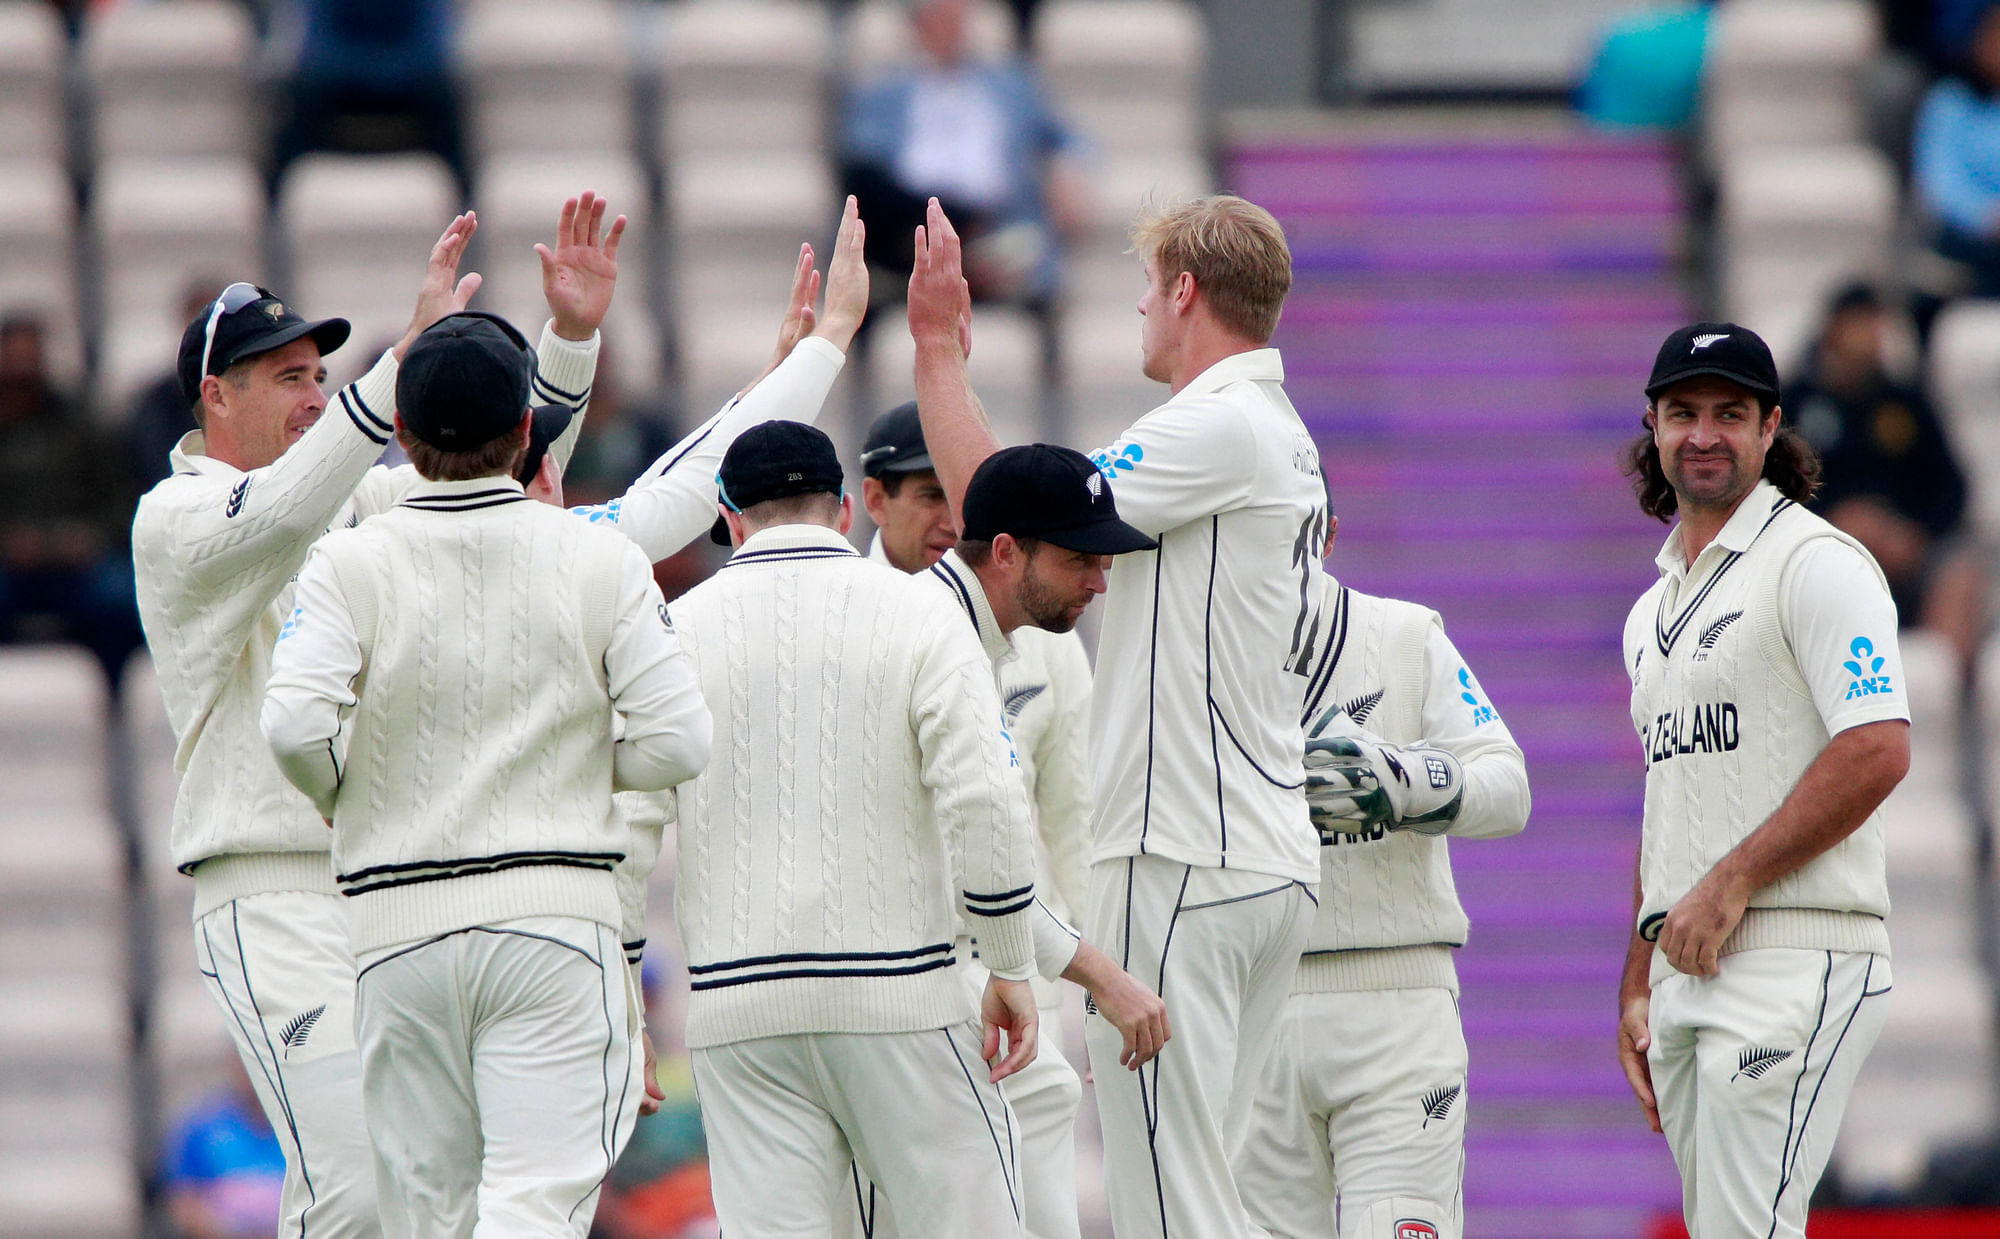 Southampton: New Zealand’s Kyle Jamieson, second right, celebrates with teammates the dismissal of India’s captain Virat Kohli during the third day of the World Test Championship final cricket match between New Zealand and India.